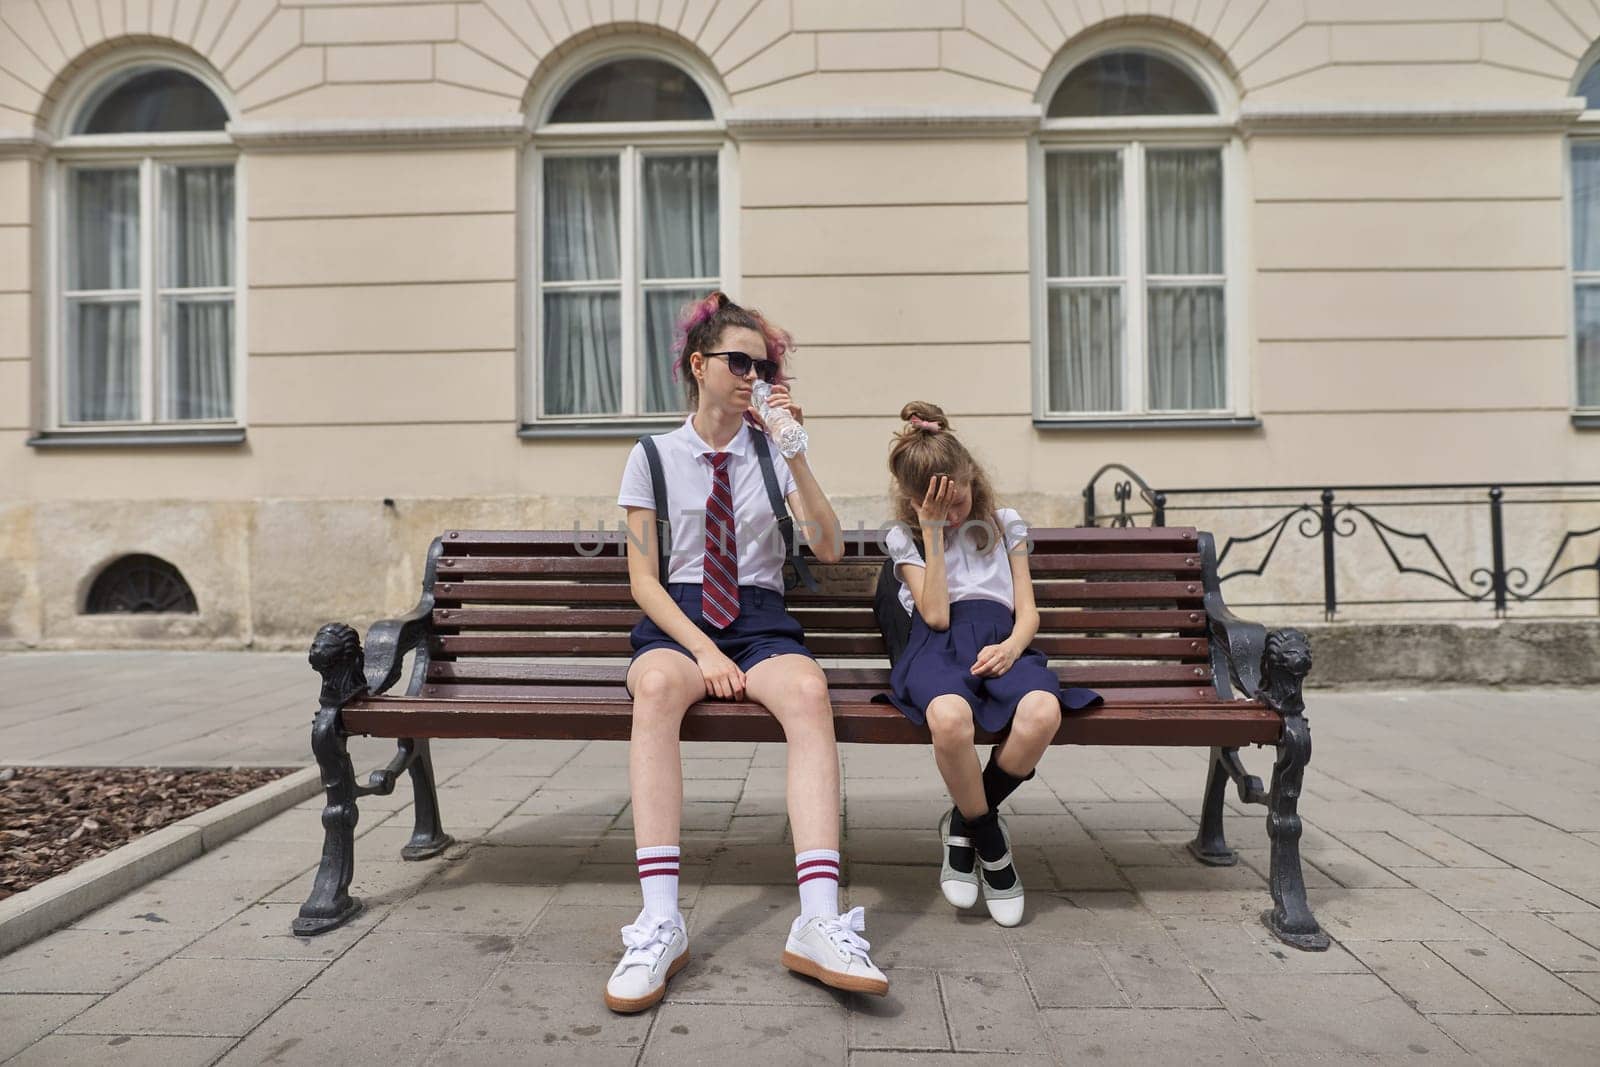 Tired schoolchildren sitting on bench. Two girls sisters teenager and elementary school student resting after class at school. Fatigue, stress, problems in school life